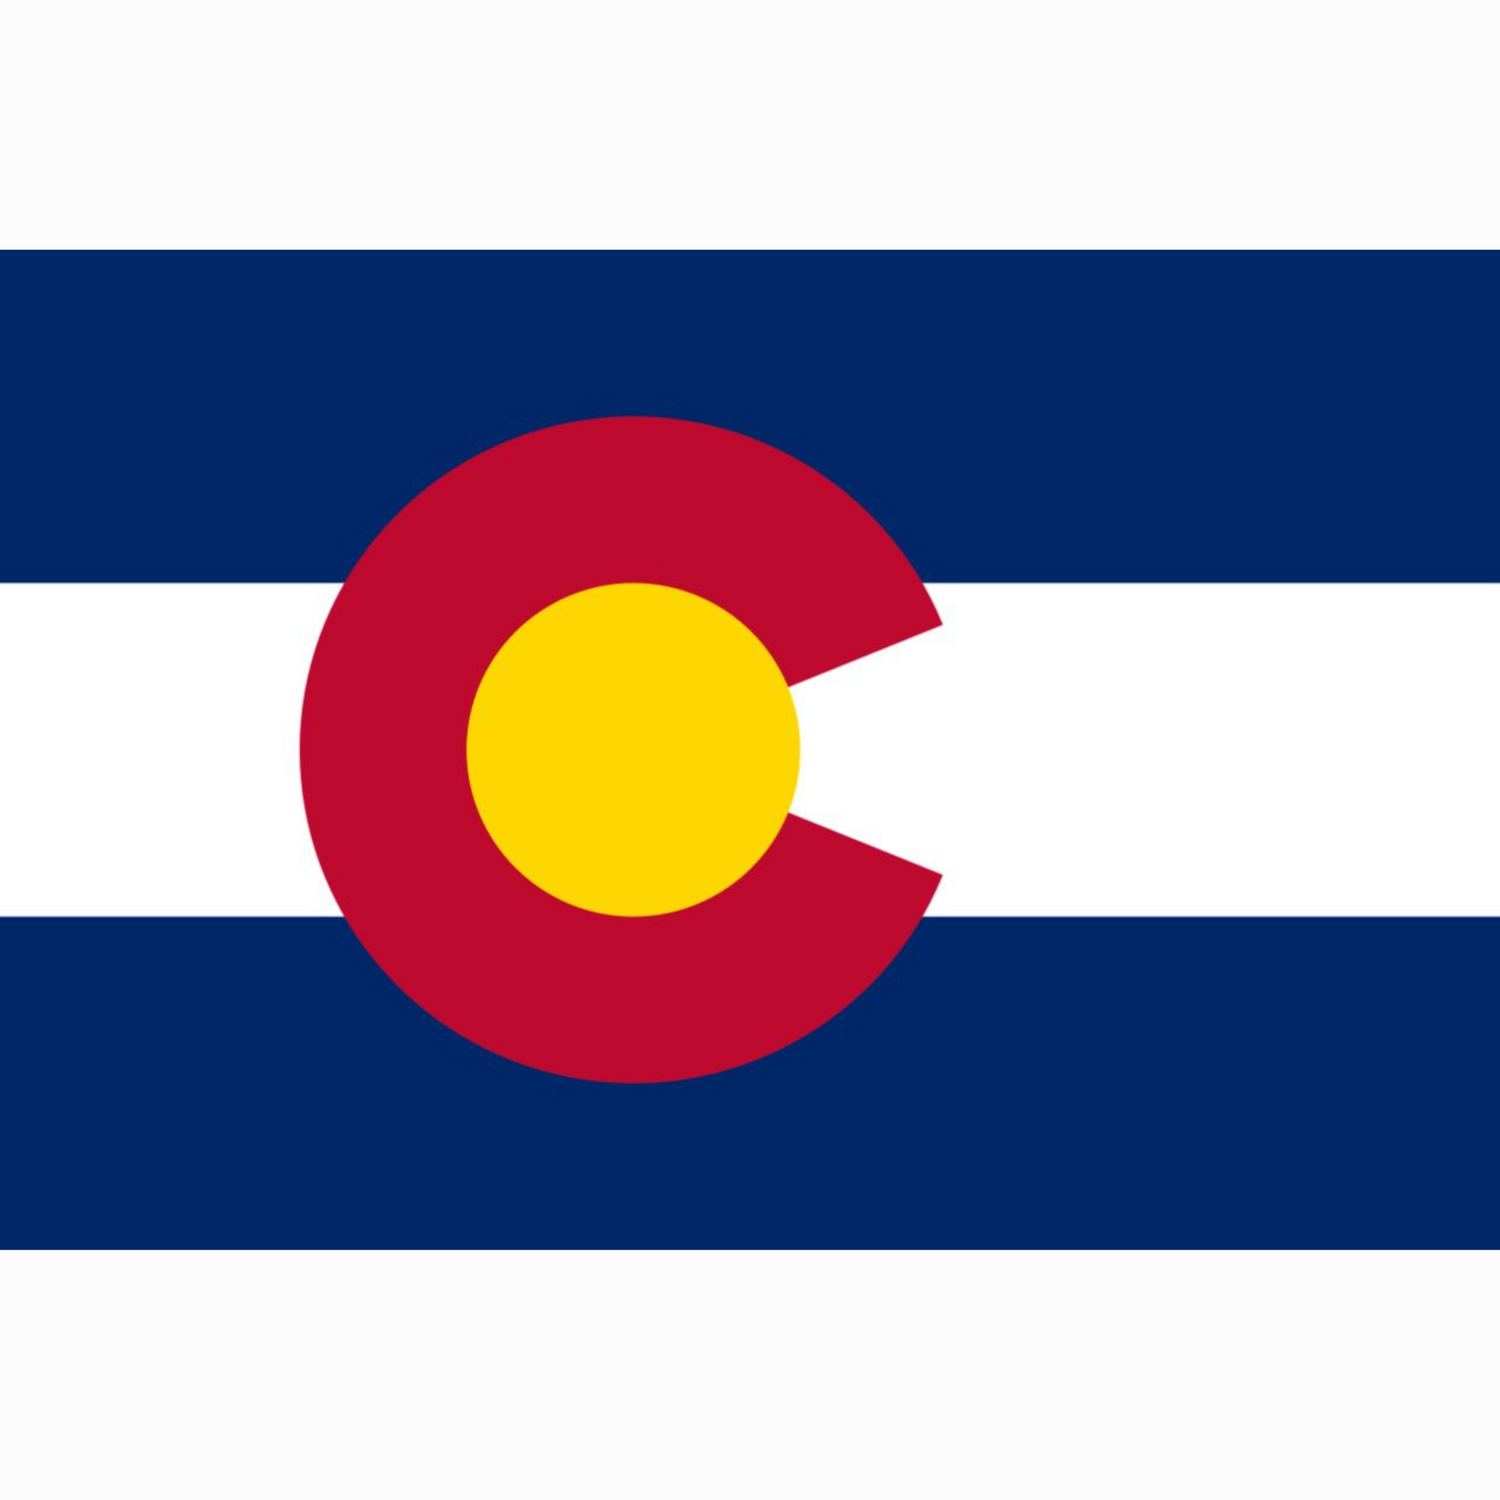 The official state flag of Colorado was adopted in 1911 and consists of two outer blue stripes, a white center stripe, and in the center is a circular red "C" with a golden disc. - History By Mail